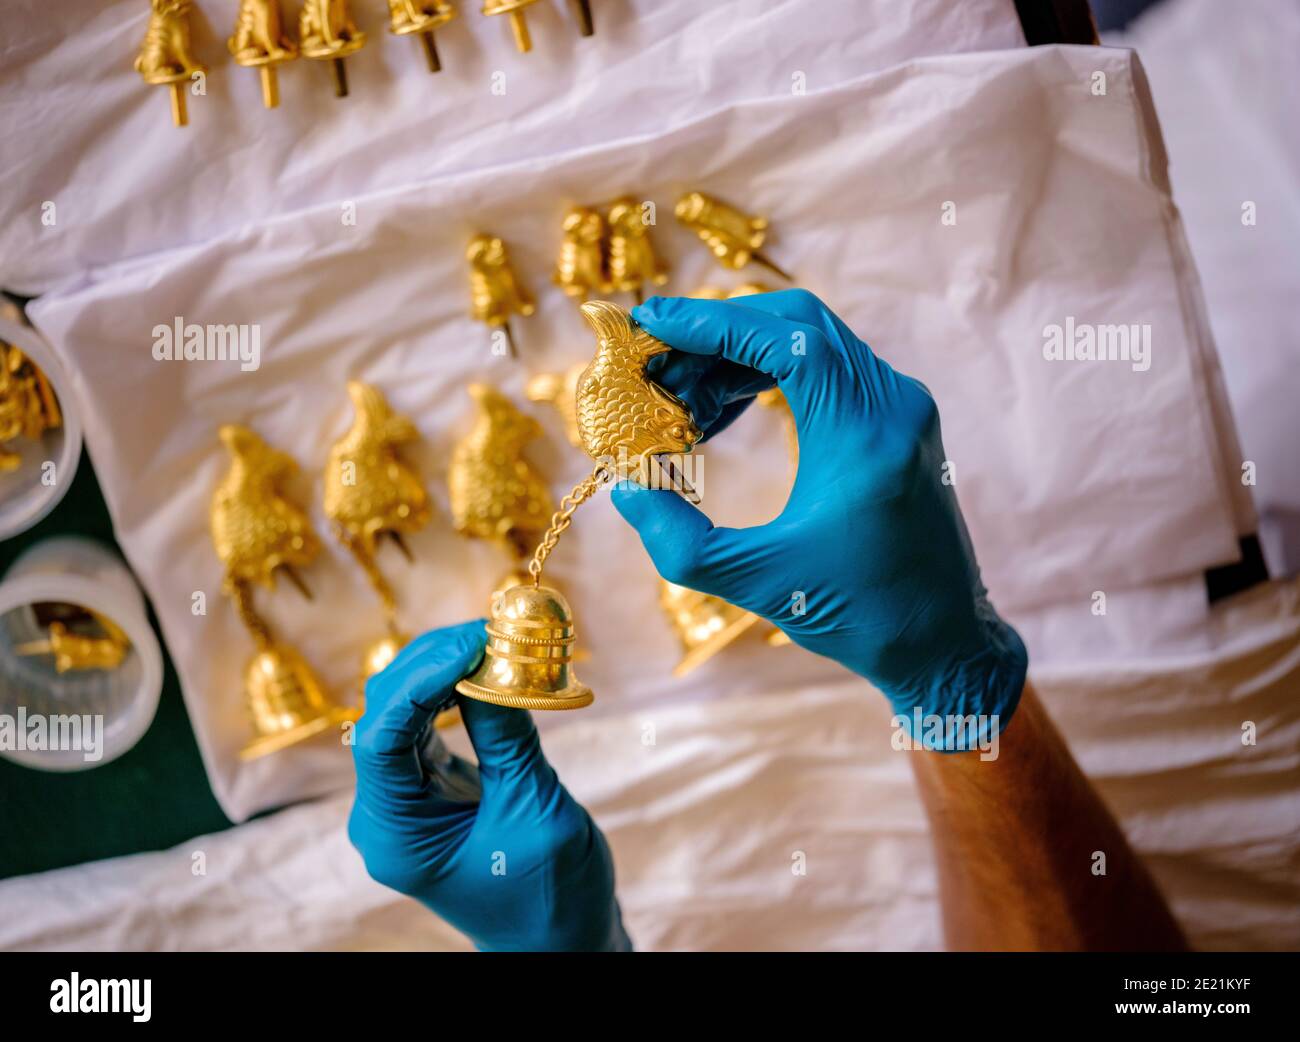 The Royal Pavilion Brighton: The music room during the exhibition of the Royal Colection a Prince's Treasure on loan 2020 and 2021. A conservator  with gilded bells preparing to be attached to the giant pagodas that form a key part of the exhibition. Stock Photo